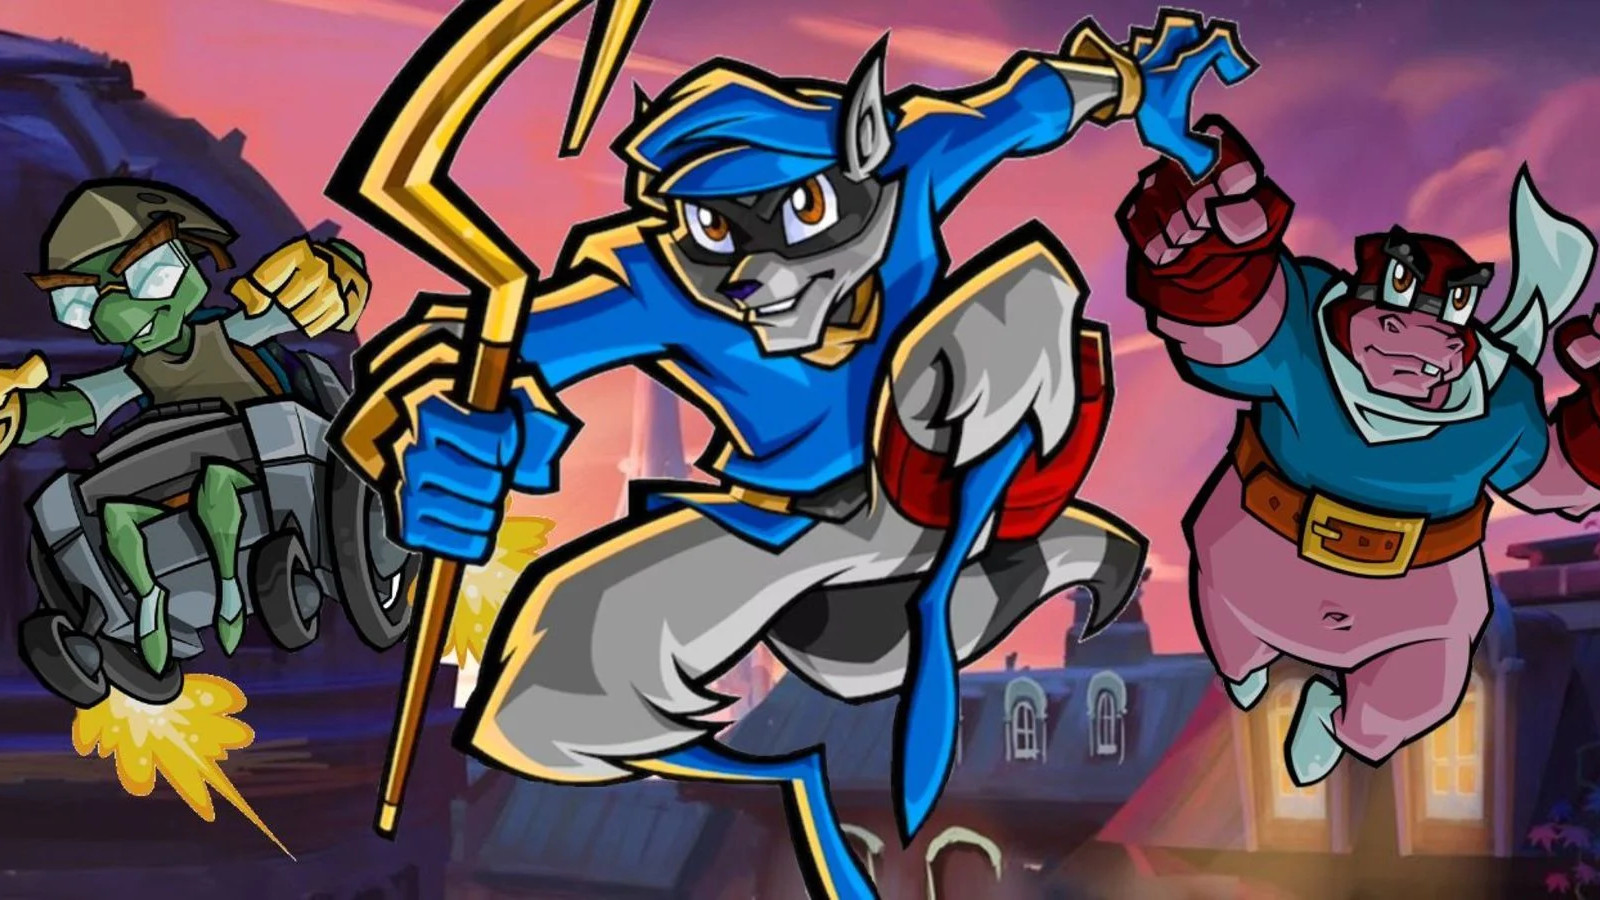 Sony Playstation 2 Sly Cooper and the Thievius Raccoonus PS2 Reviews 2023